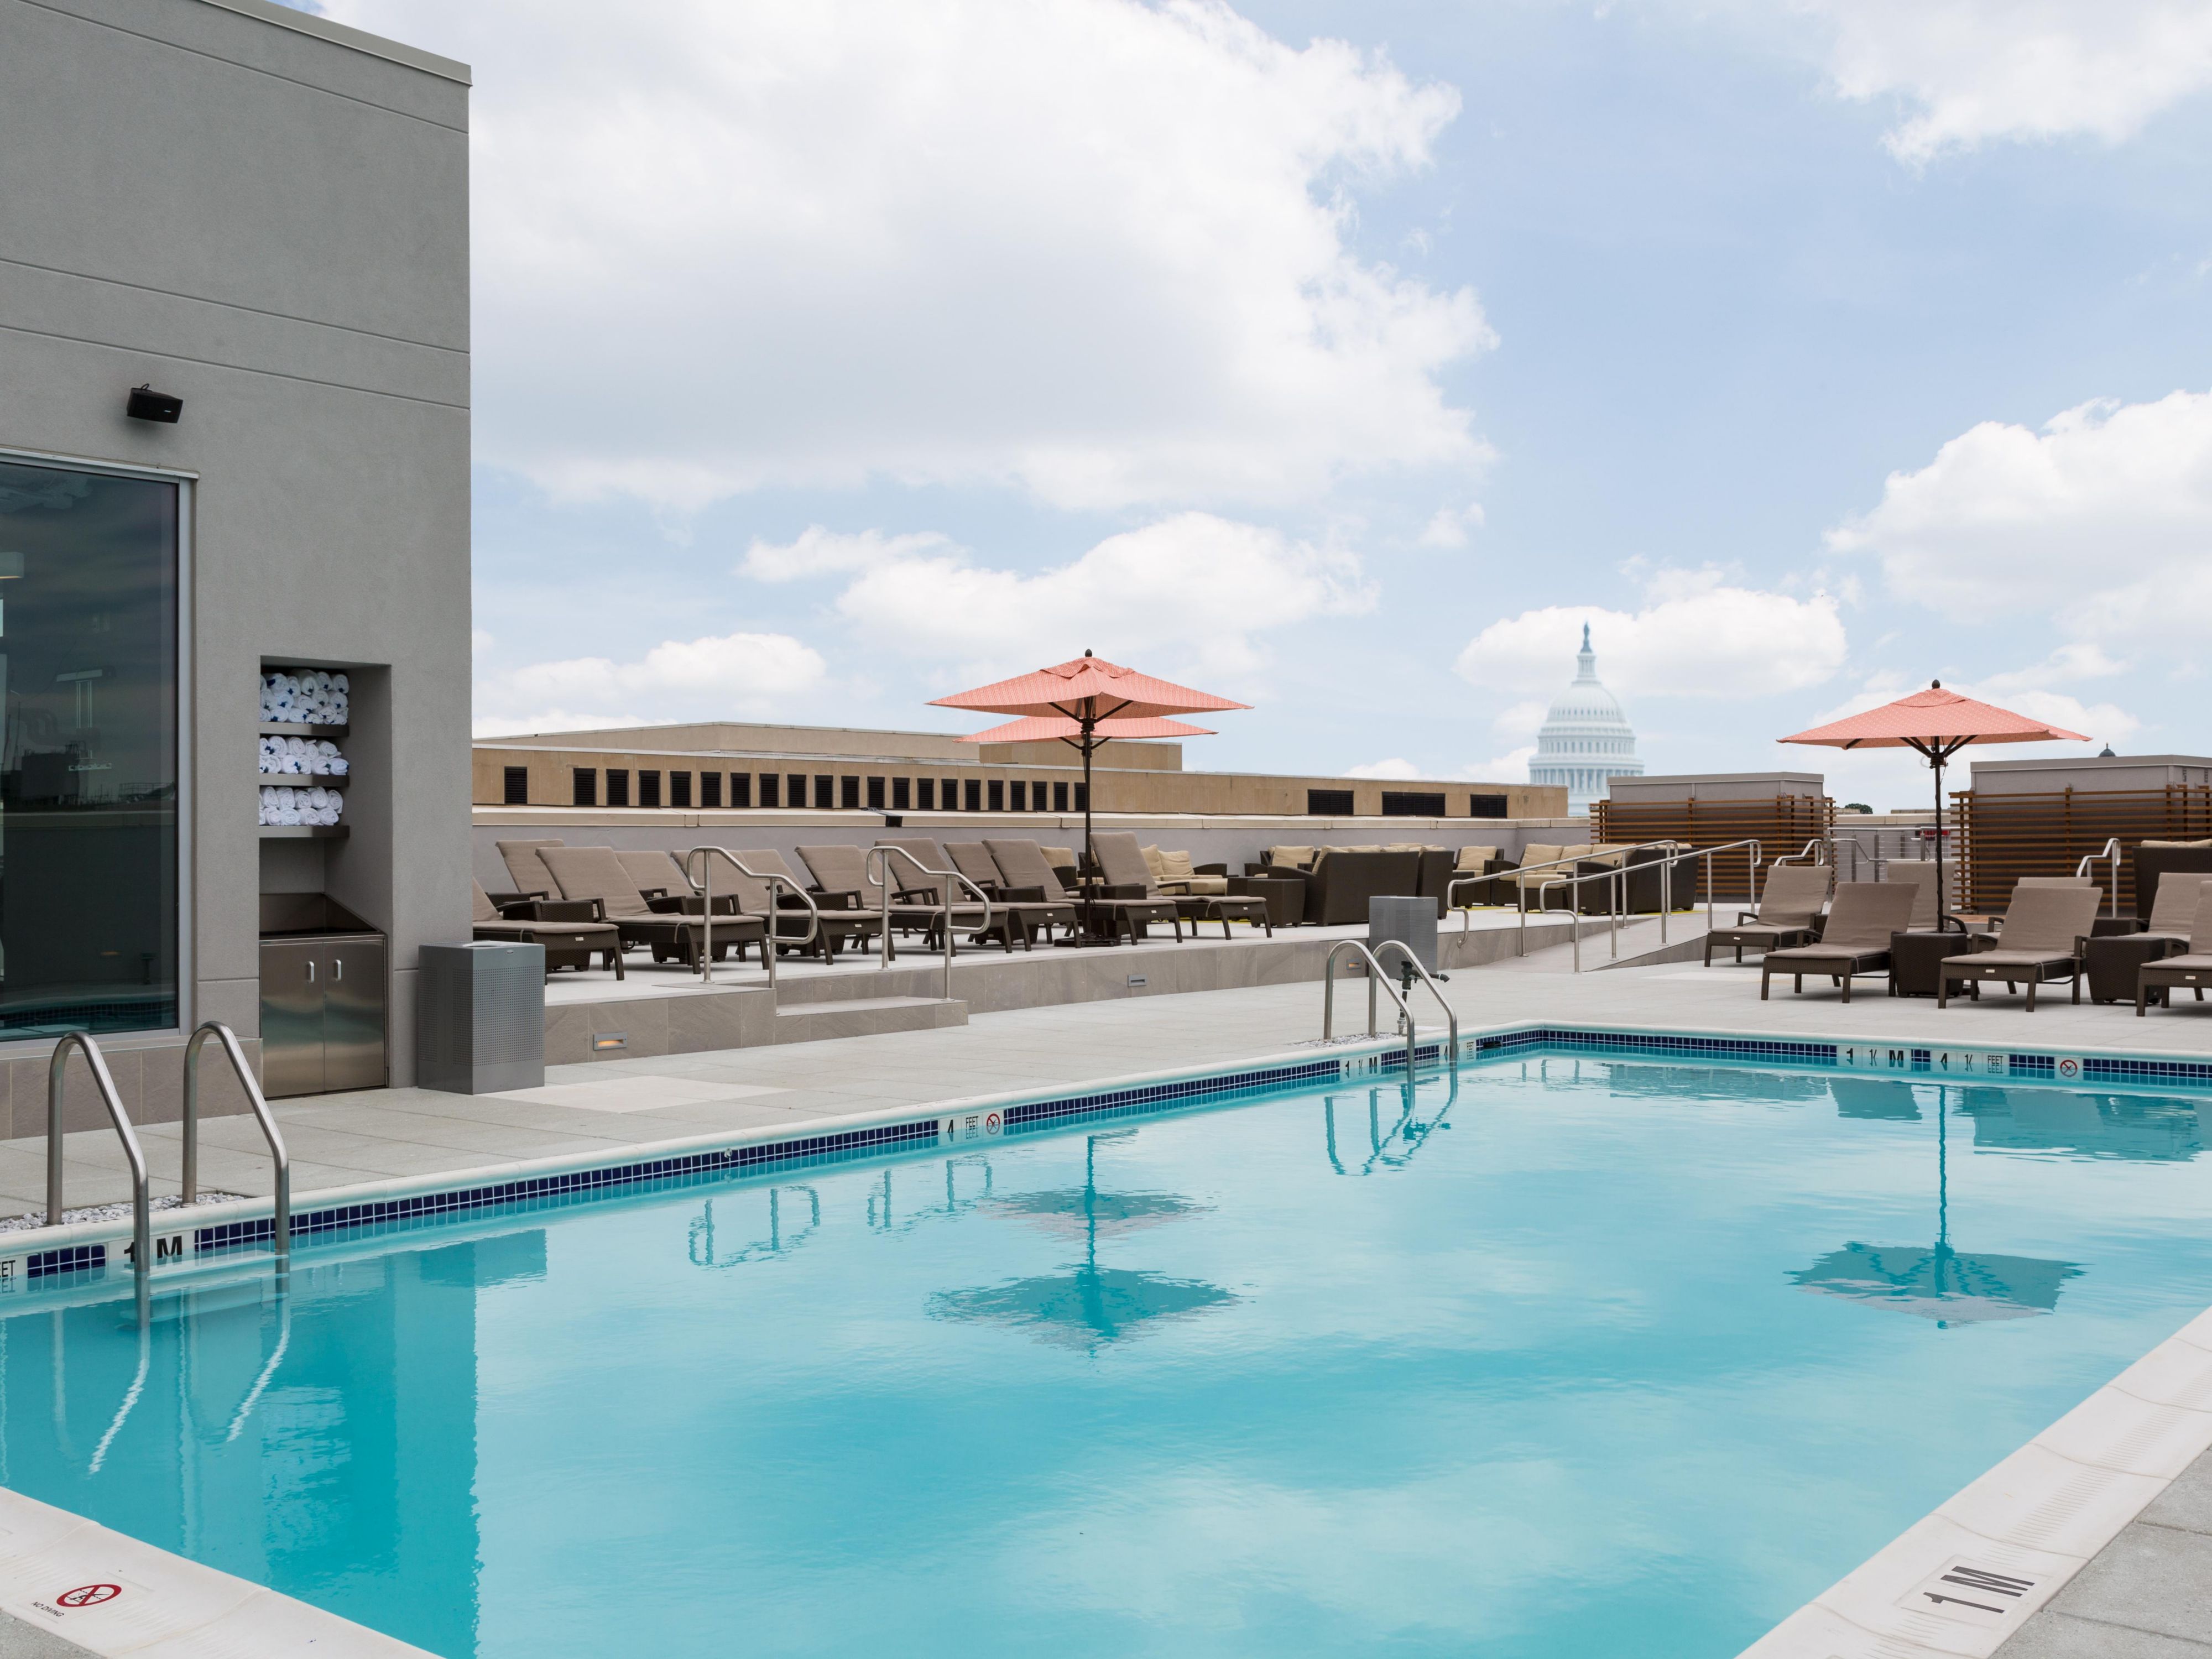 From Memorial Day to Labor Day, enjoy a relaxing, sunsoaked day on our hotel rooftop. Adjacent to the 24 hour fitness center, the rooftop area features comfortable seating options, the pool, and a bar serving drinks as well as light fare. Overlooking the US Capitol building, it is the perfect way to spend a day in Washington DC. 